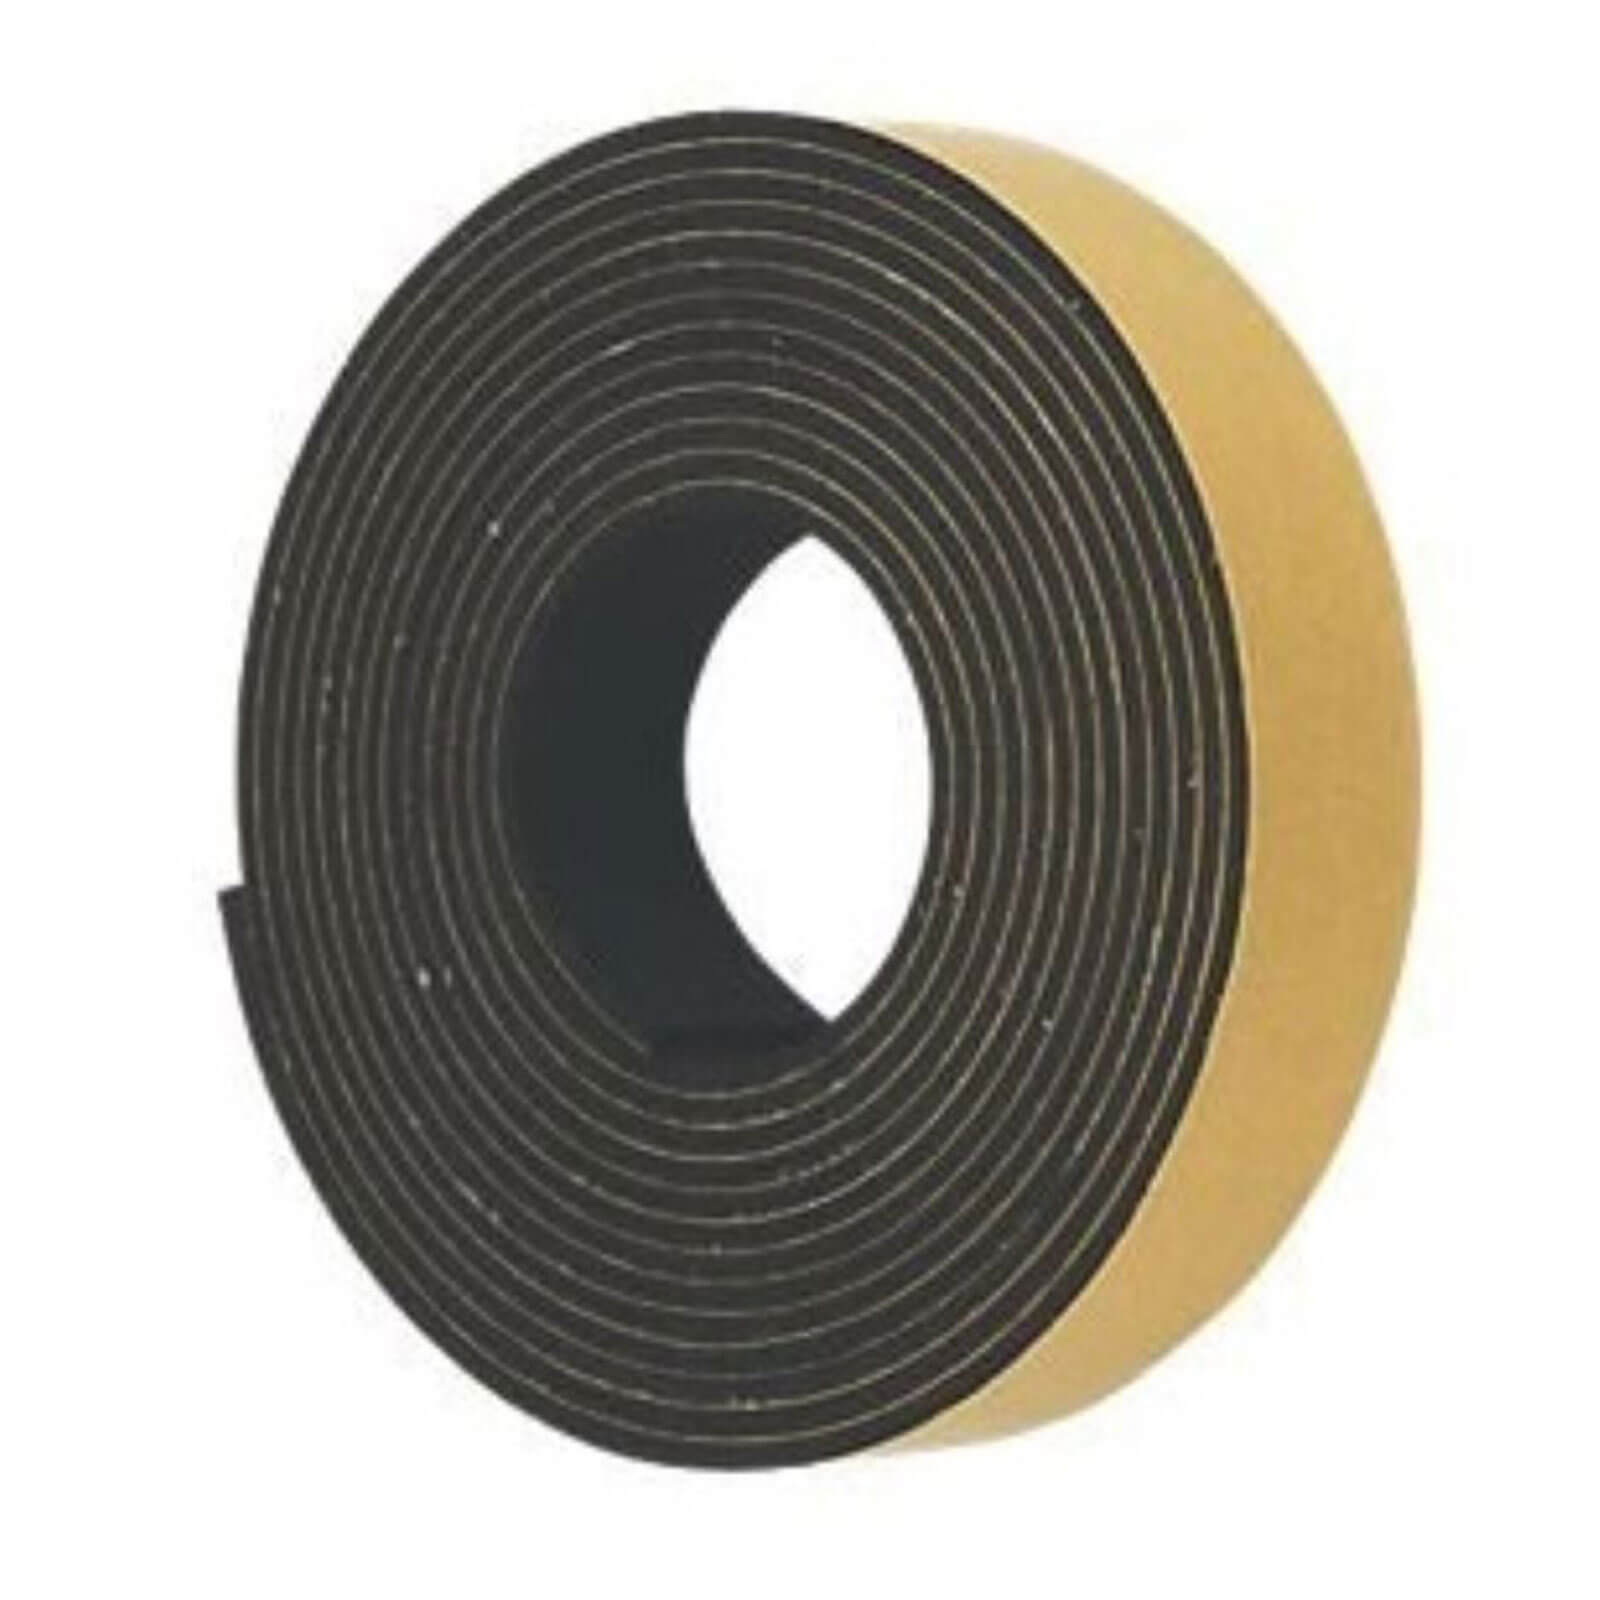 Image of DeWalt Replacement High Friction Strip for Plunge Saw Guide Rails